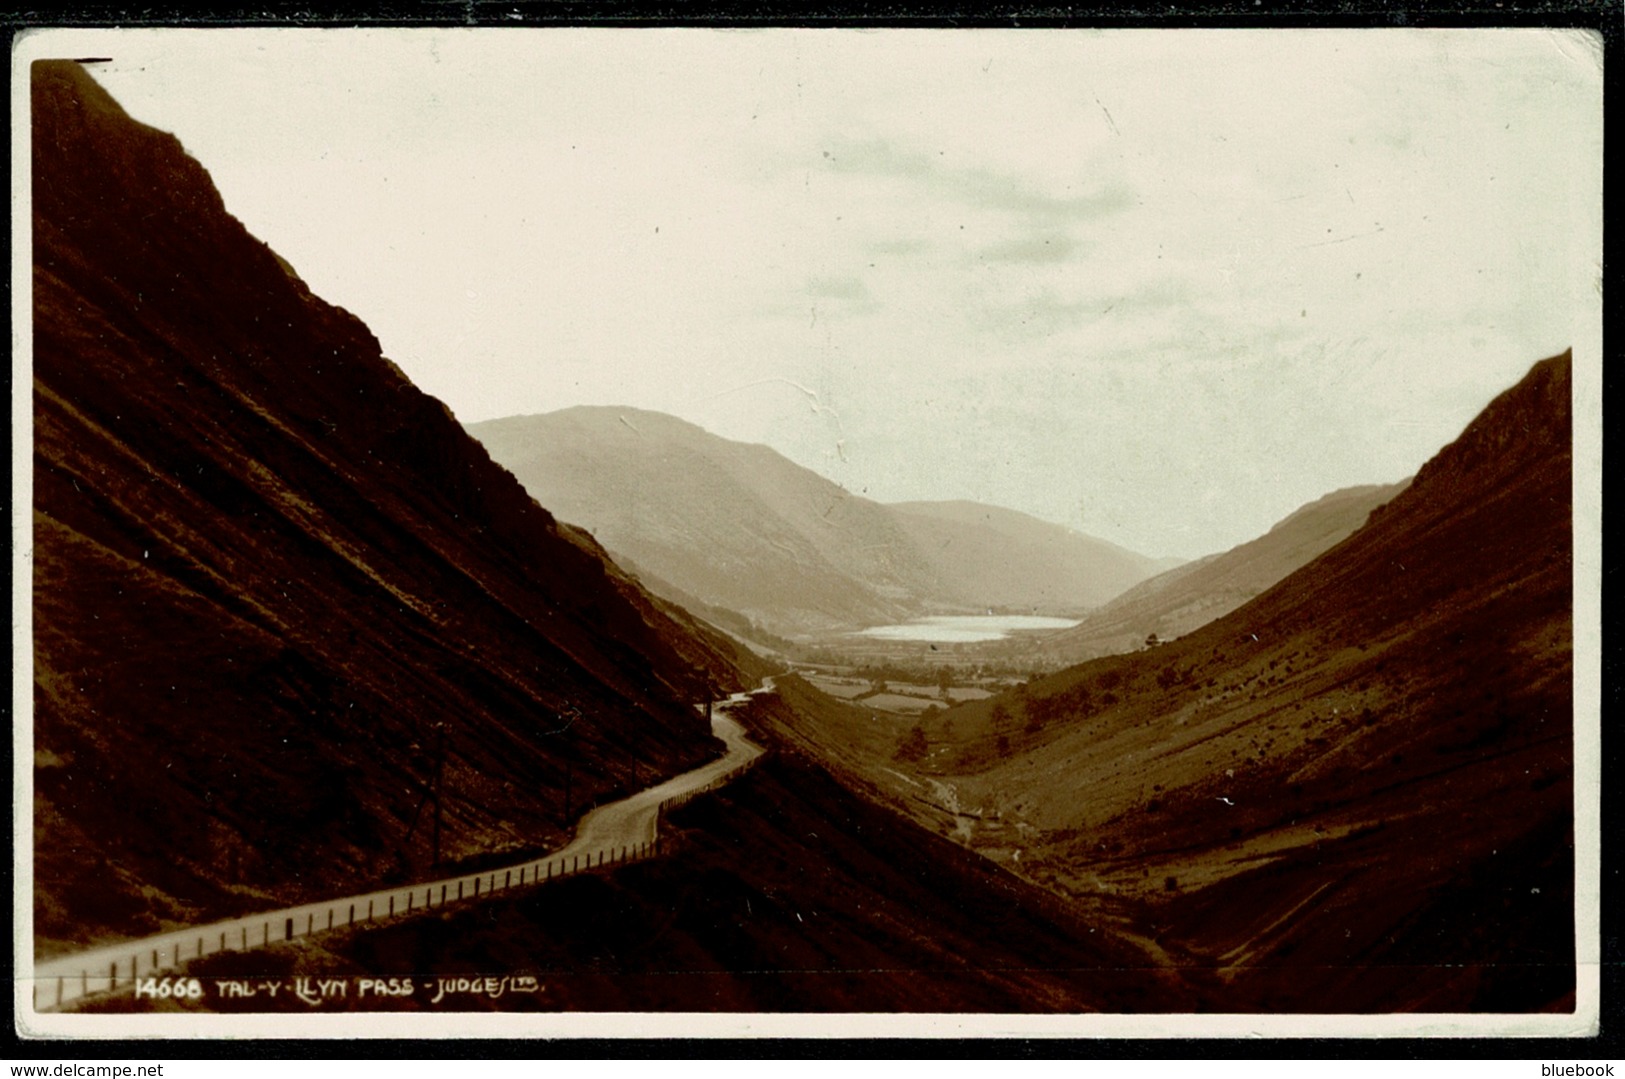 Ref 1269 - Judges Real Photo Postcard - Tal-Y-LLyn Pass Merionethshire Wales - Merionethshire